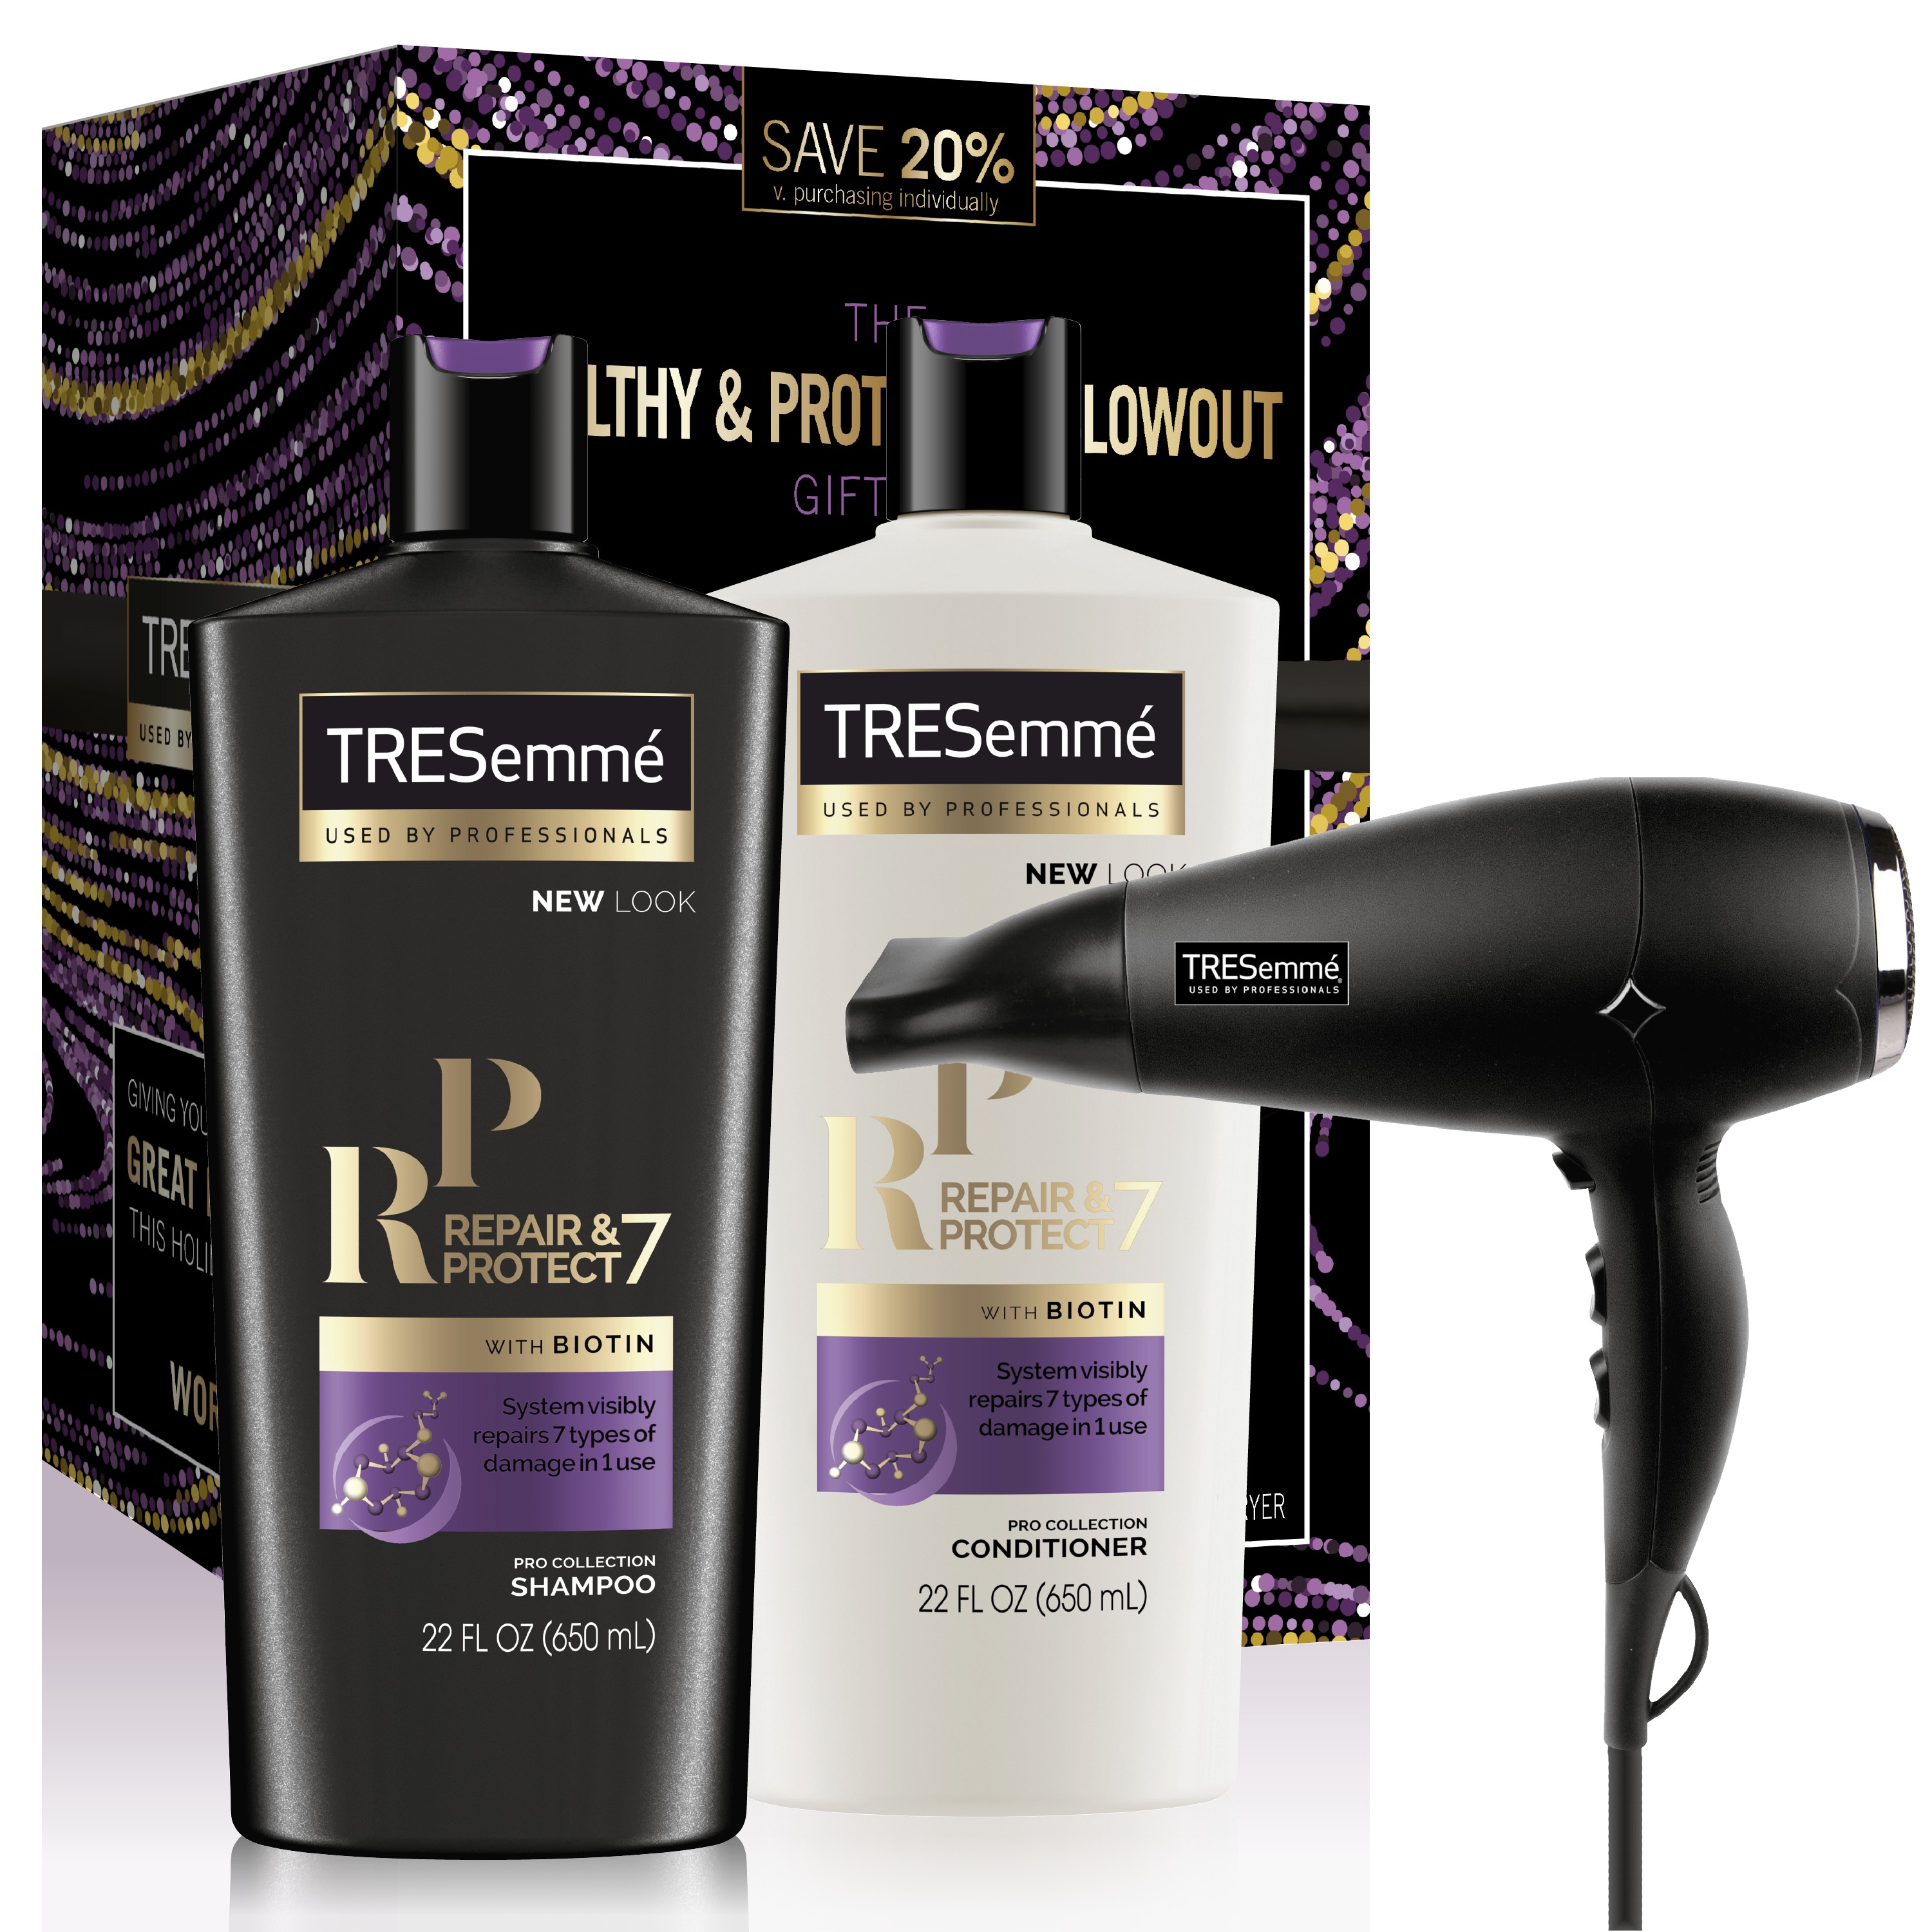 TRESemme 3-Pc Healthy & Protected Blowout Gift Set Repair and Protect with Hair Dryer (Shampoo, Conditioner) ($24.84 Value) - image 1 of 11